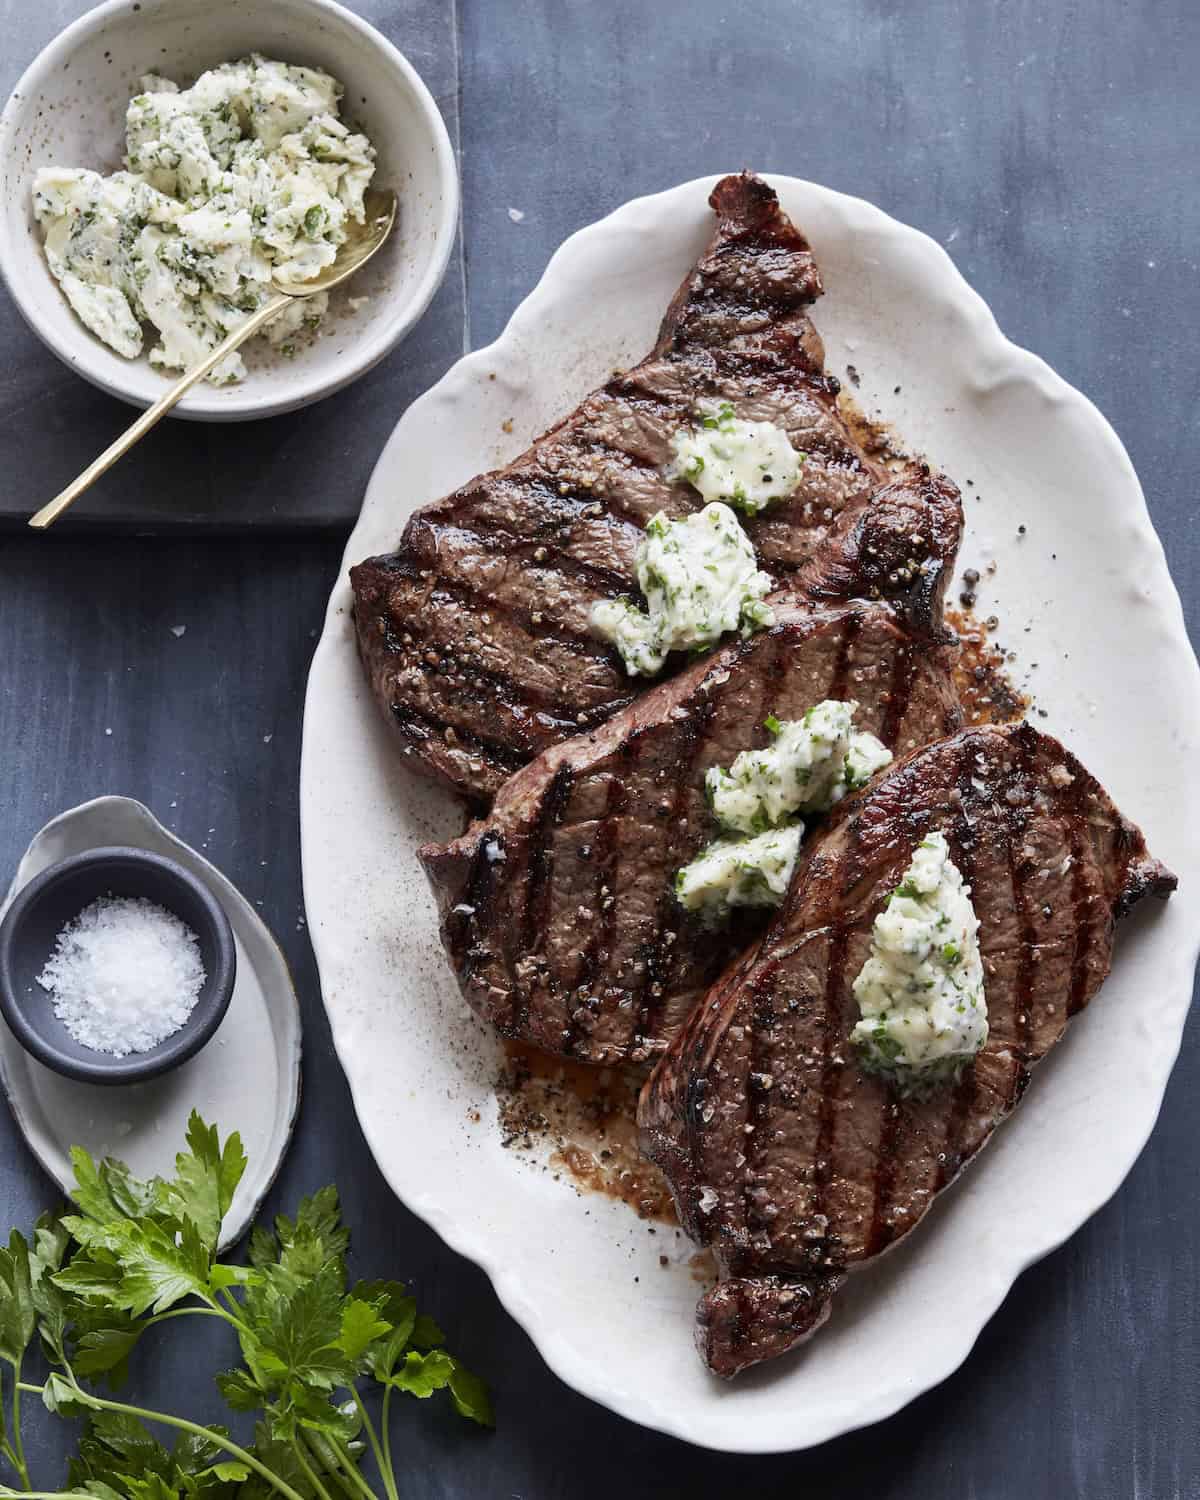 A platter with three grilled rib eye steak topped with a small dollop of compound butter, and a bowl of compound butter and a little bowl of salt on the side.